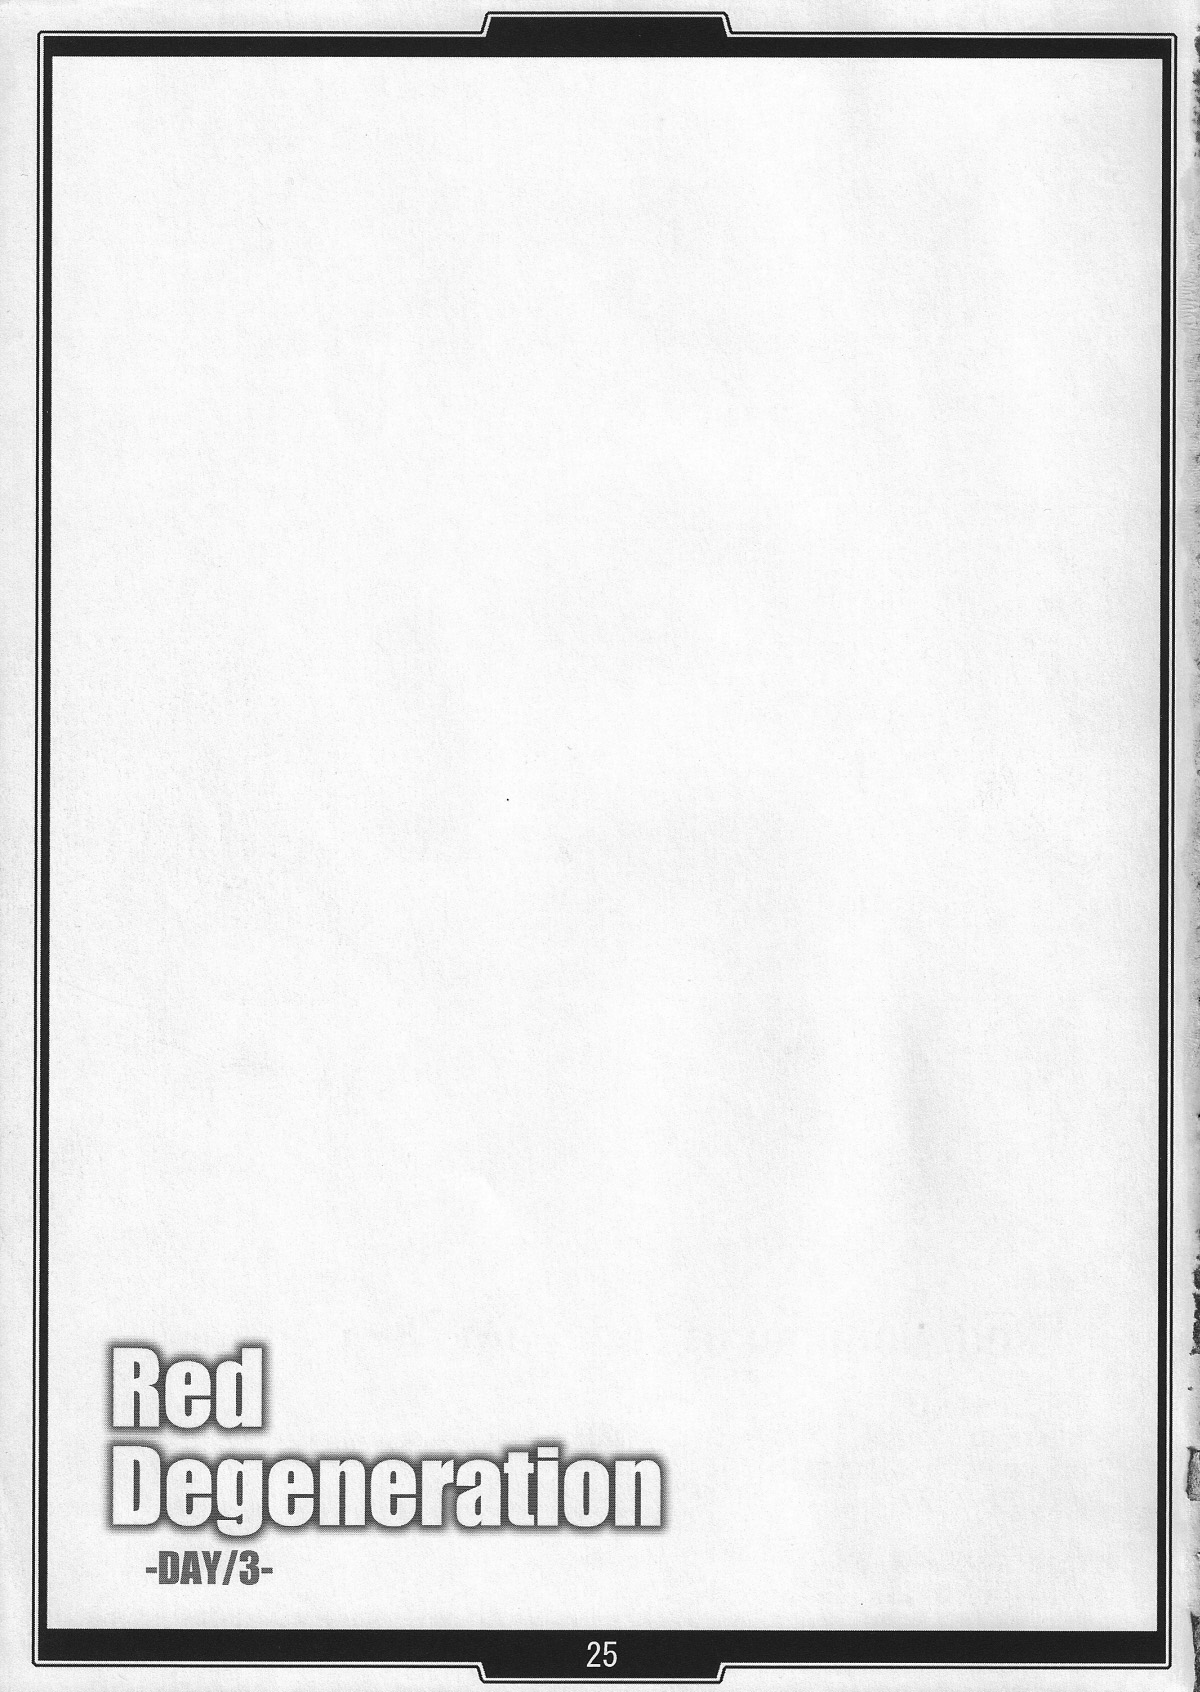 (COMIC1☆2) [H.B (B-RIVER)] Red Degeneration -DAY/3- (Fate/stay night) [Chinese] [不咕鸟汉化组] page 24 full